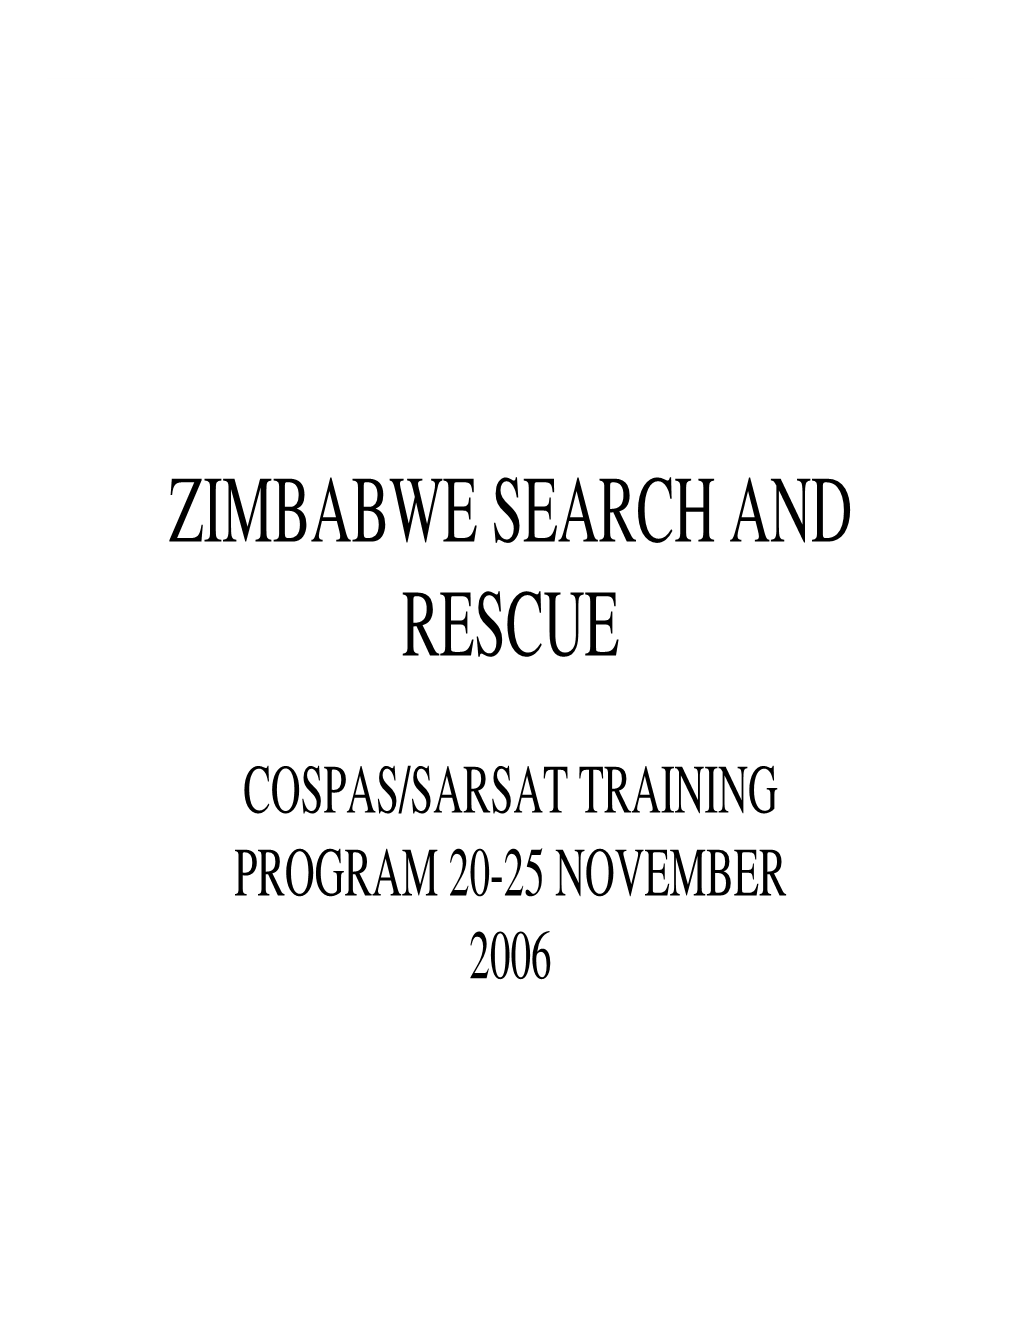 Zimbabwe Search and Rescue